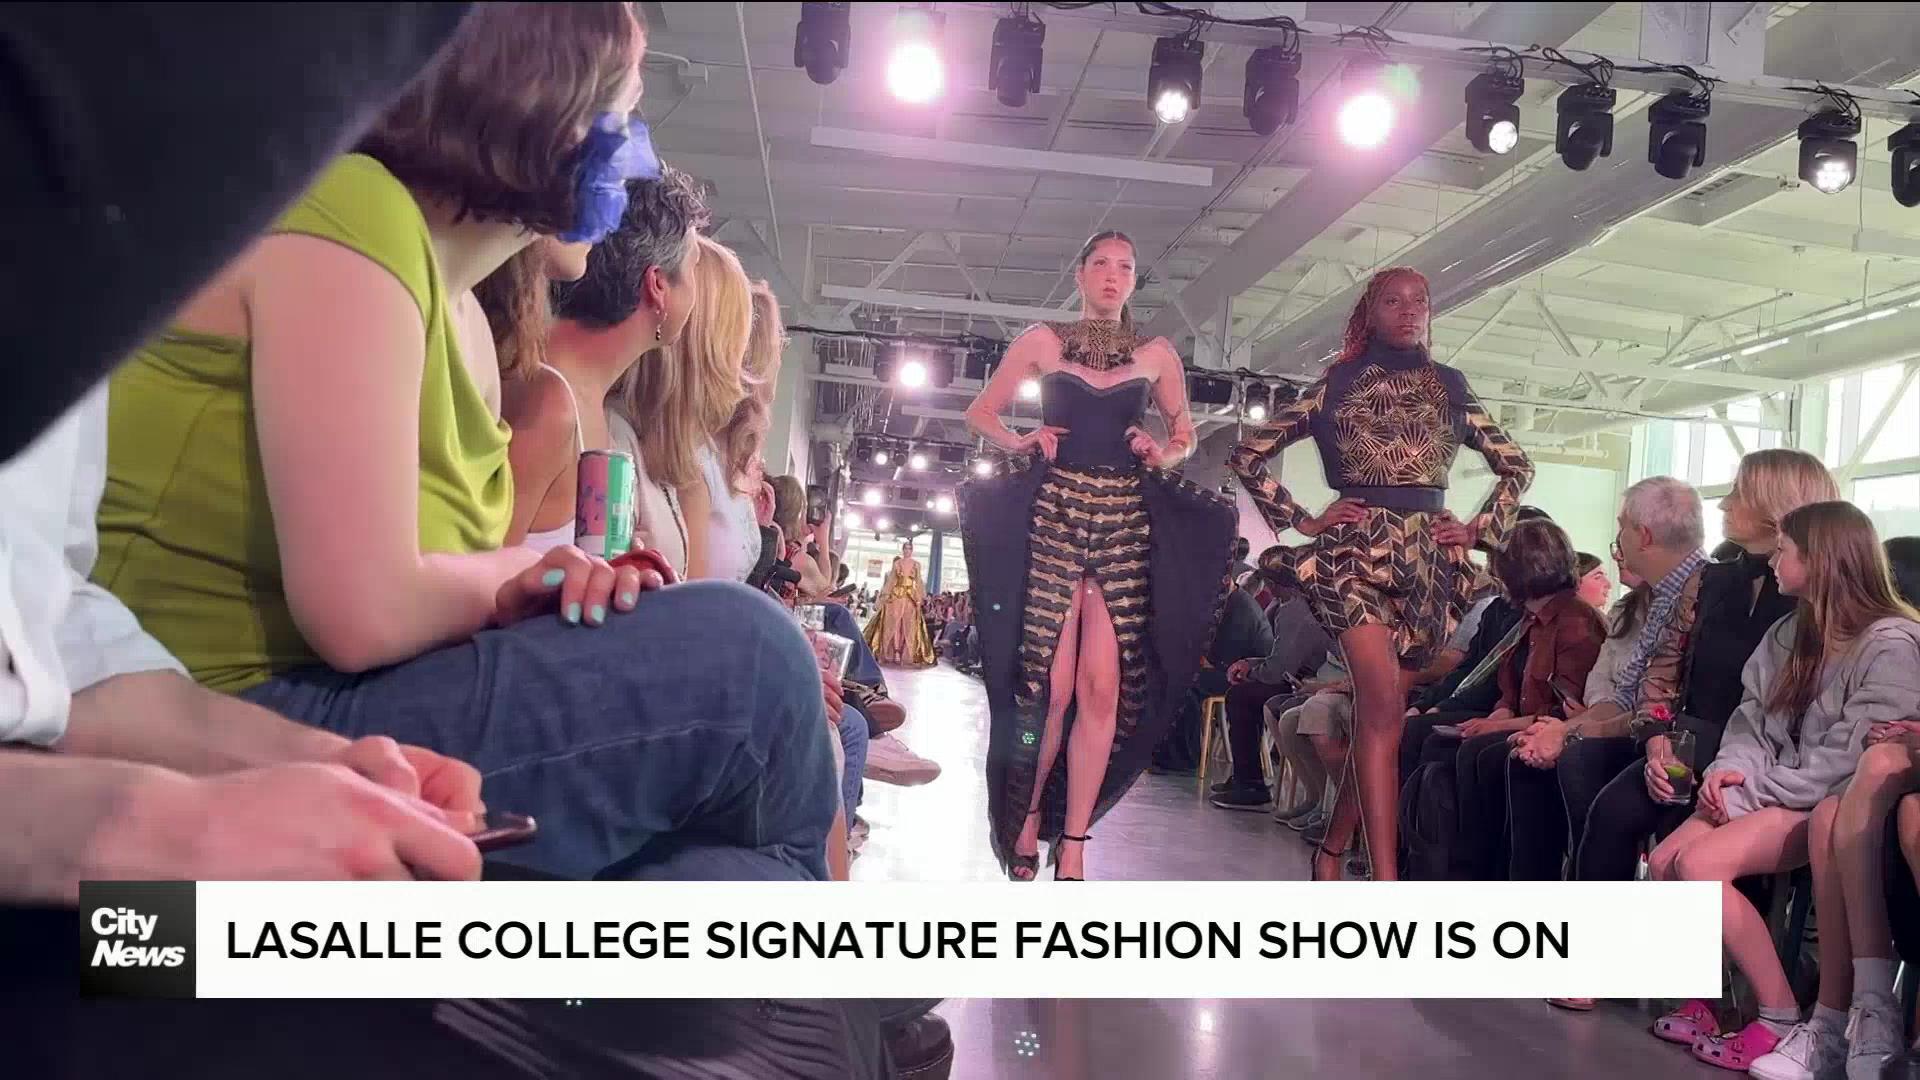 Graduates from LaSalle College reveal tomorrow’s fashion trends